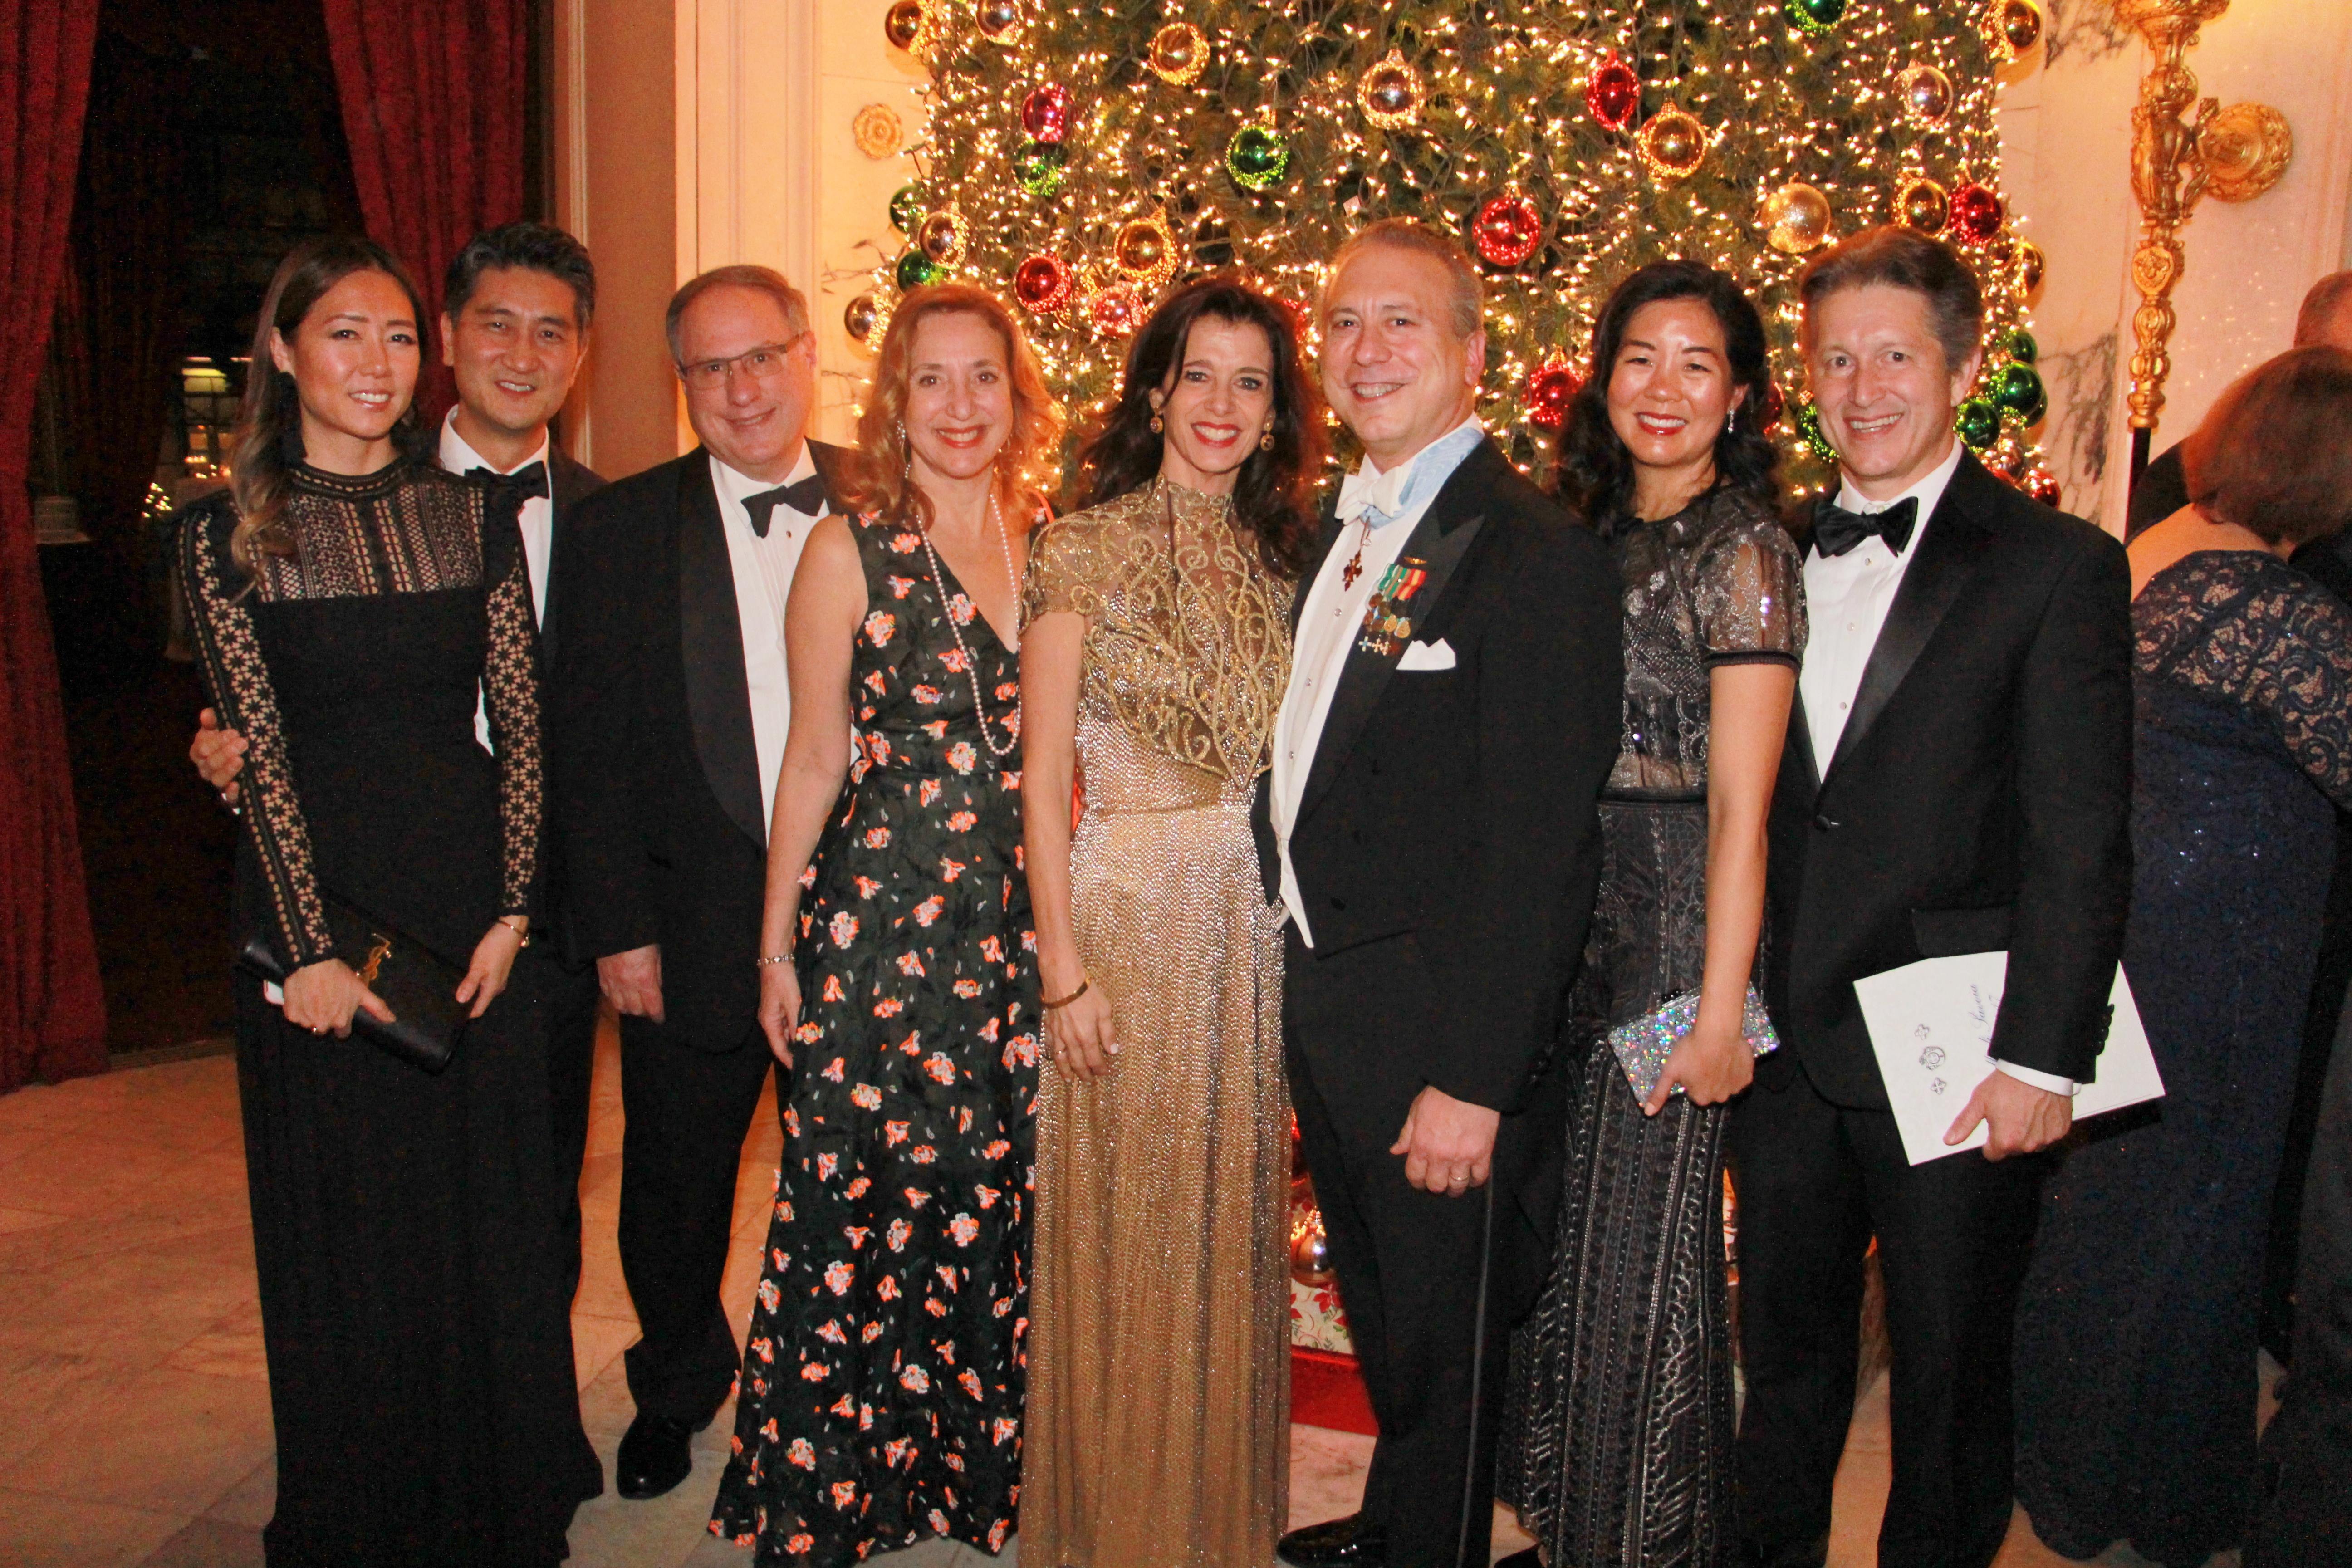 Ball Benefactors Mrs. Paula and Mrs. Anthony Viscogliosi (center) with guests